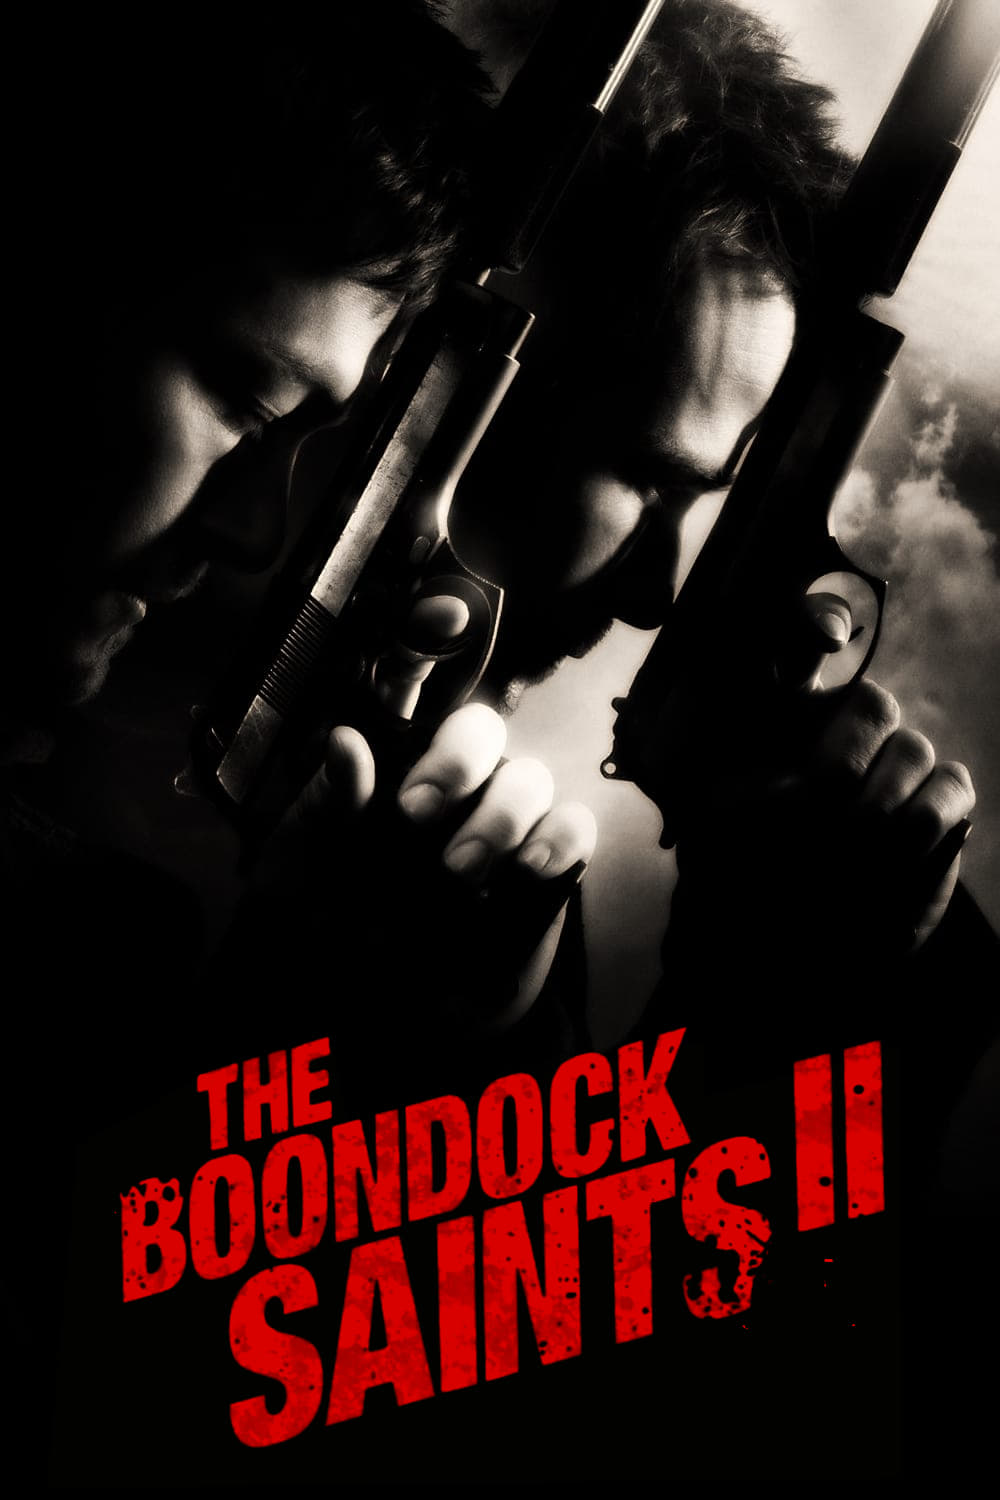 Download The Boondock Saints II: All Saints Day (2009) {English Audio With Subtitles} 480p [400MB] || 720p [1GB] || 1080p [2.65GB]